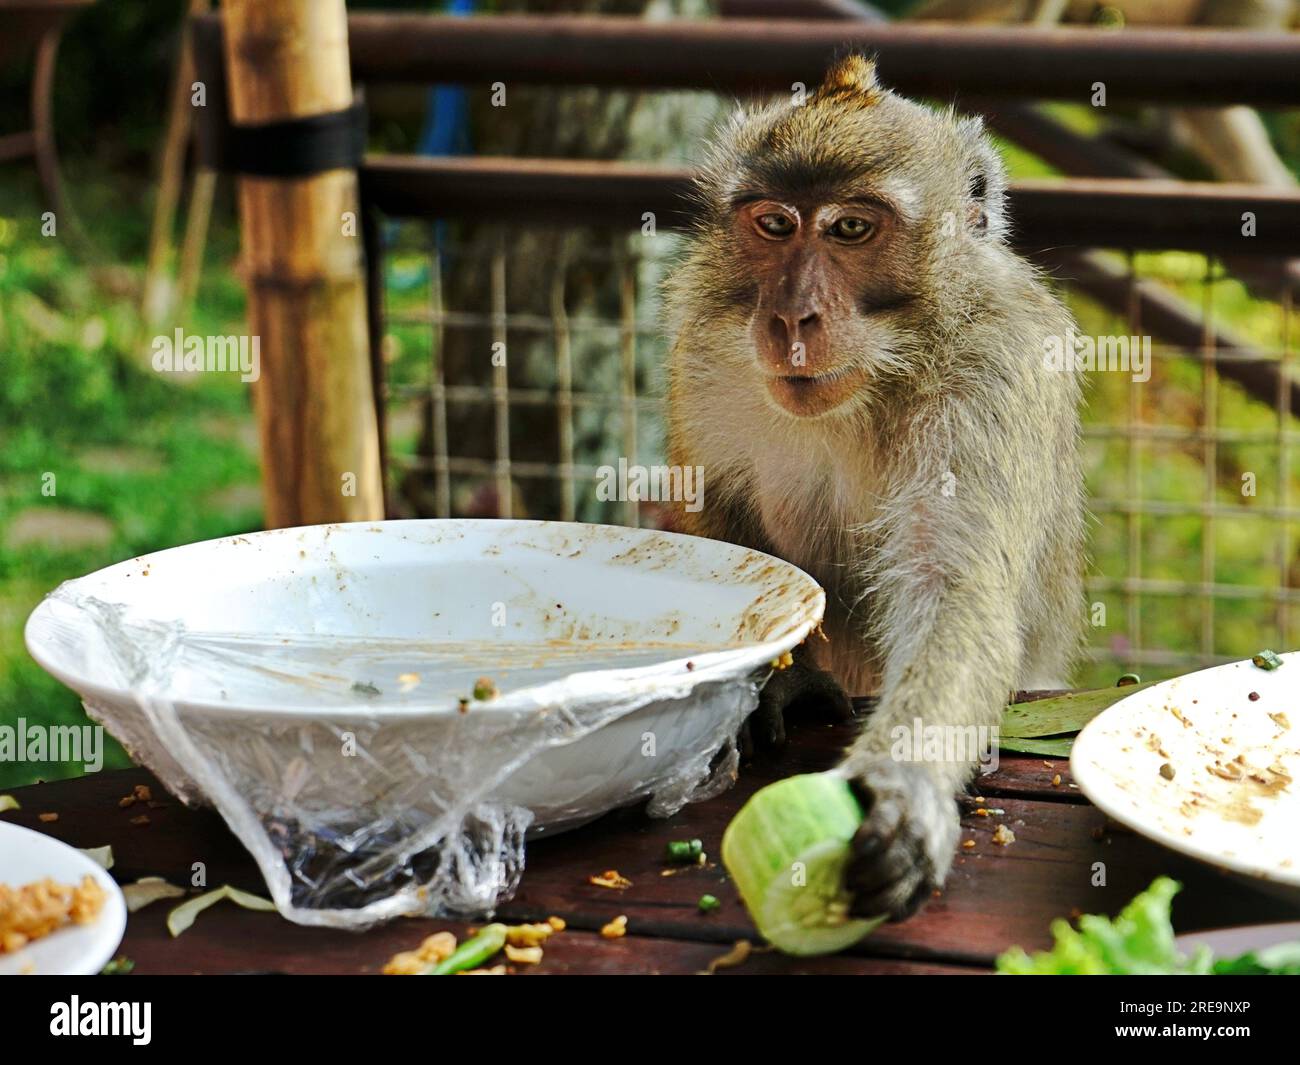 Monkey stealing food from a street market stall in India Stock Photo - Alamy